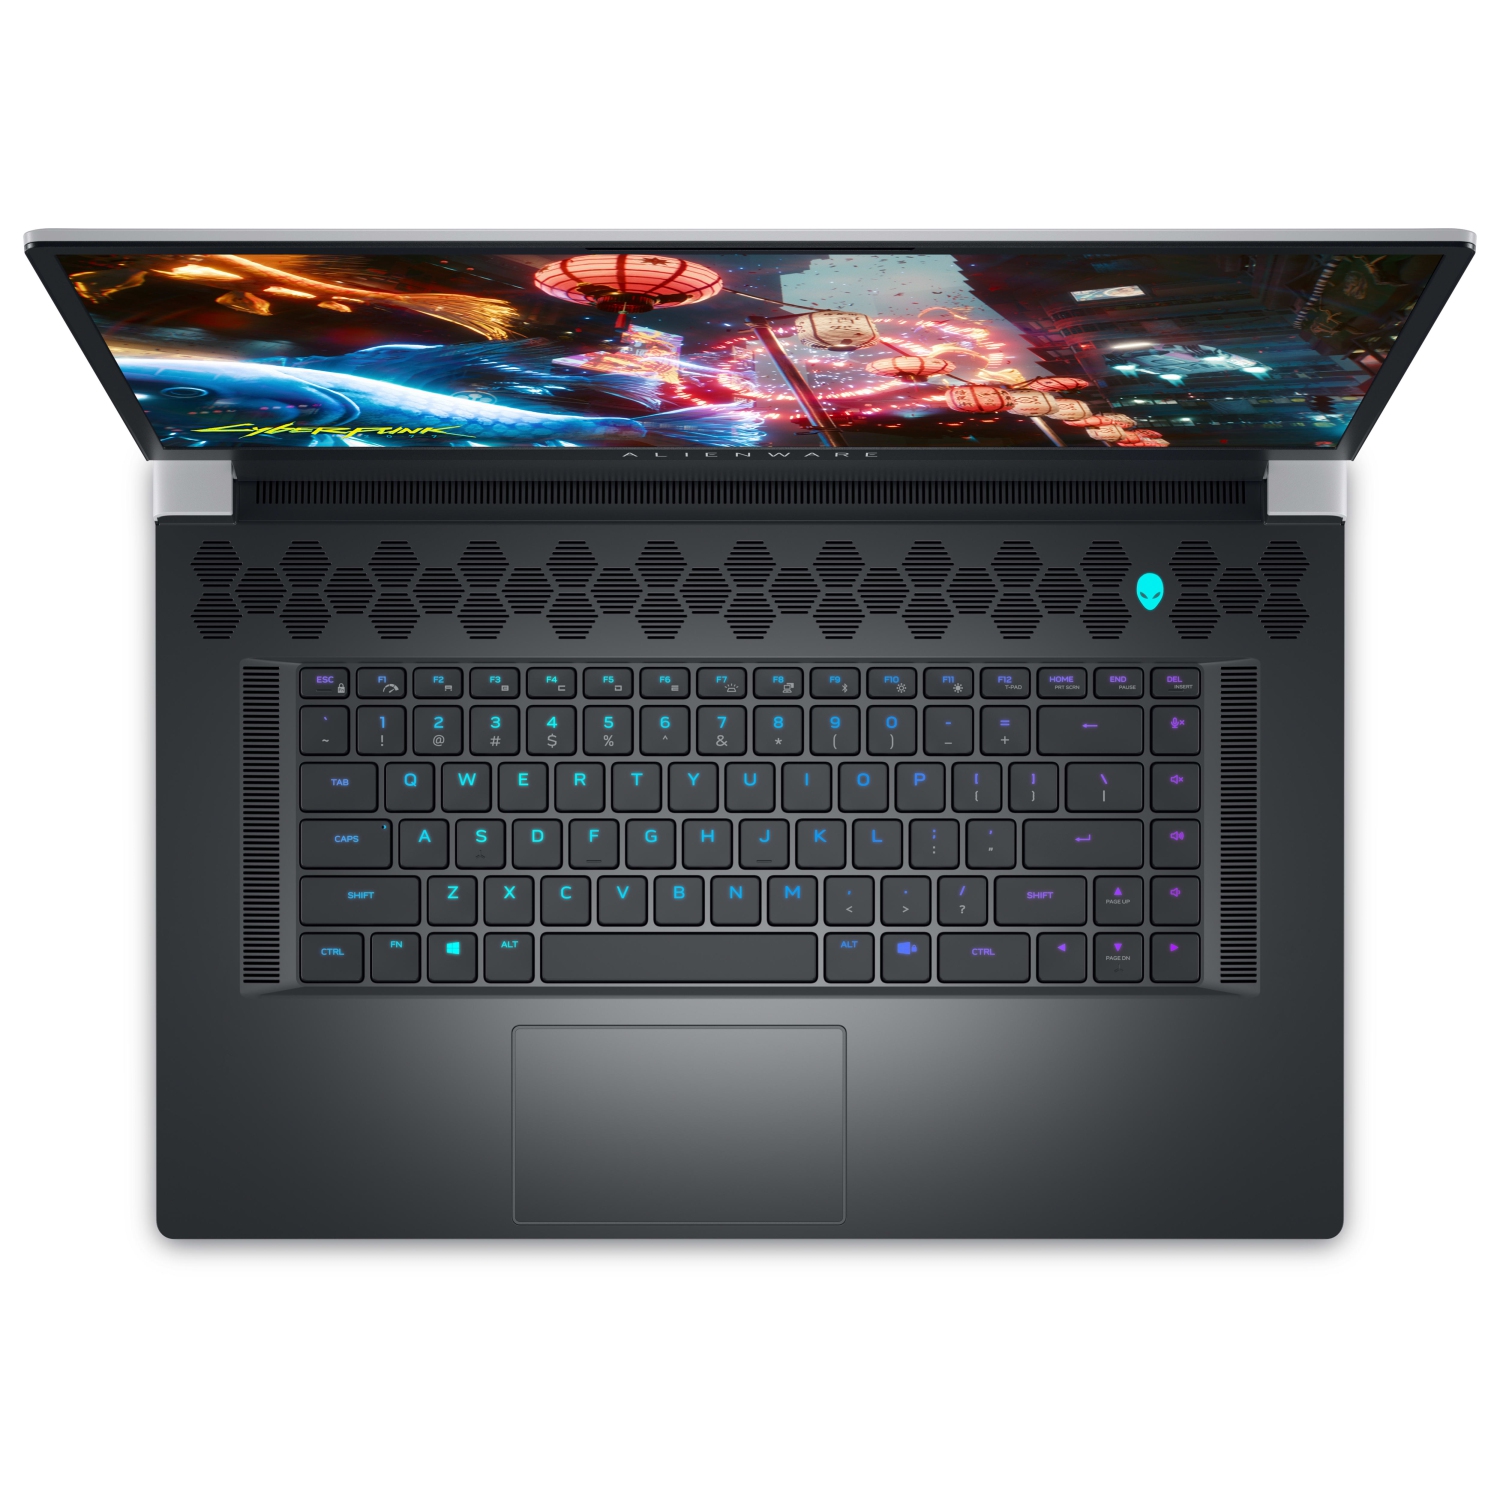 Refurbished (Excellent) – Dell Alienware X17 R2 Gaming Laptop (2022) | 17.3" 4K | Core i9 - 1TB SSD - 32GB RAM - RTX 3080 | 14 Cores @ 5 GHz - 12th Gen CPU - 10GB GDDR6X